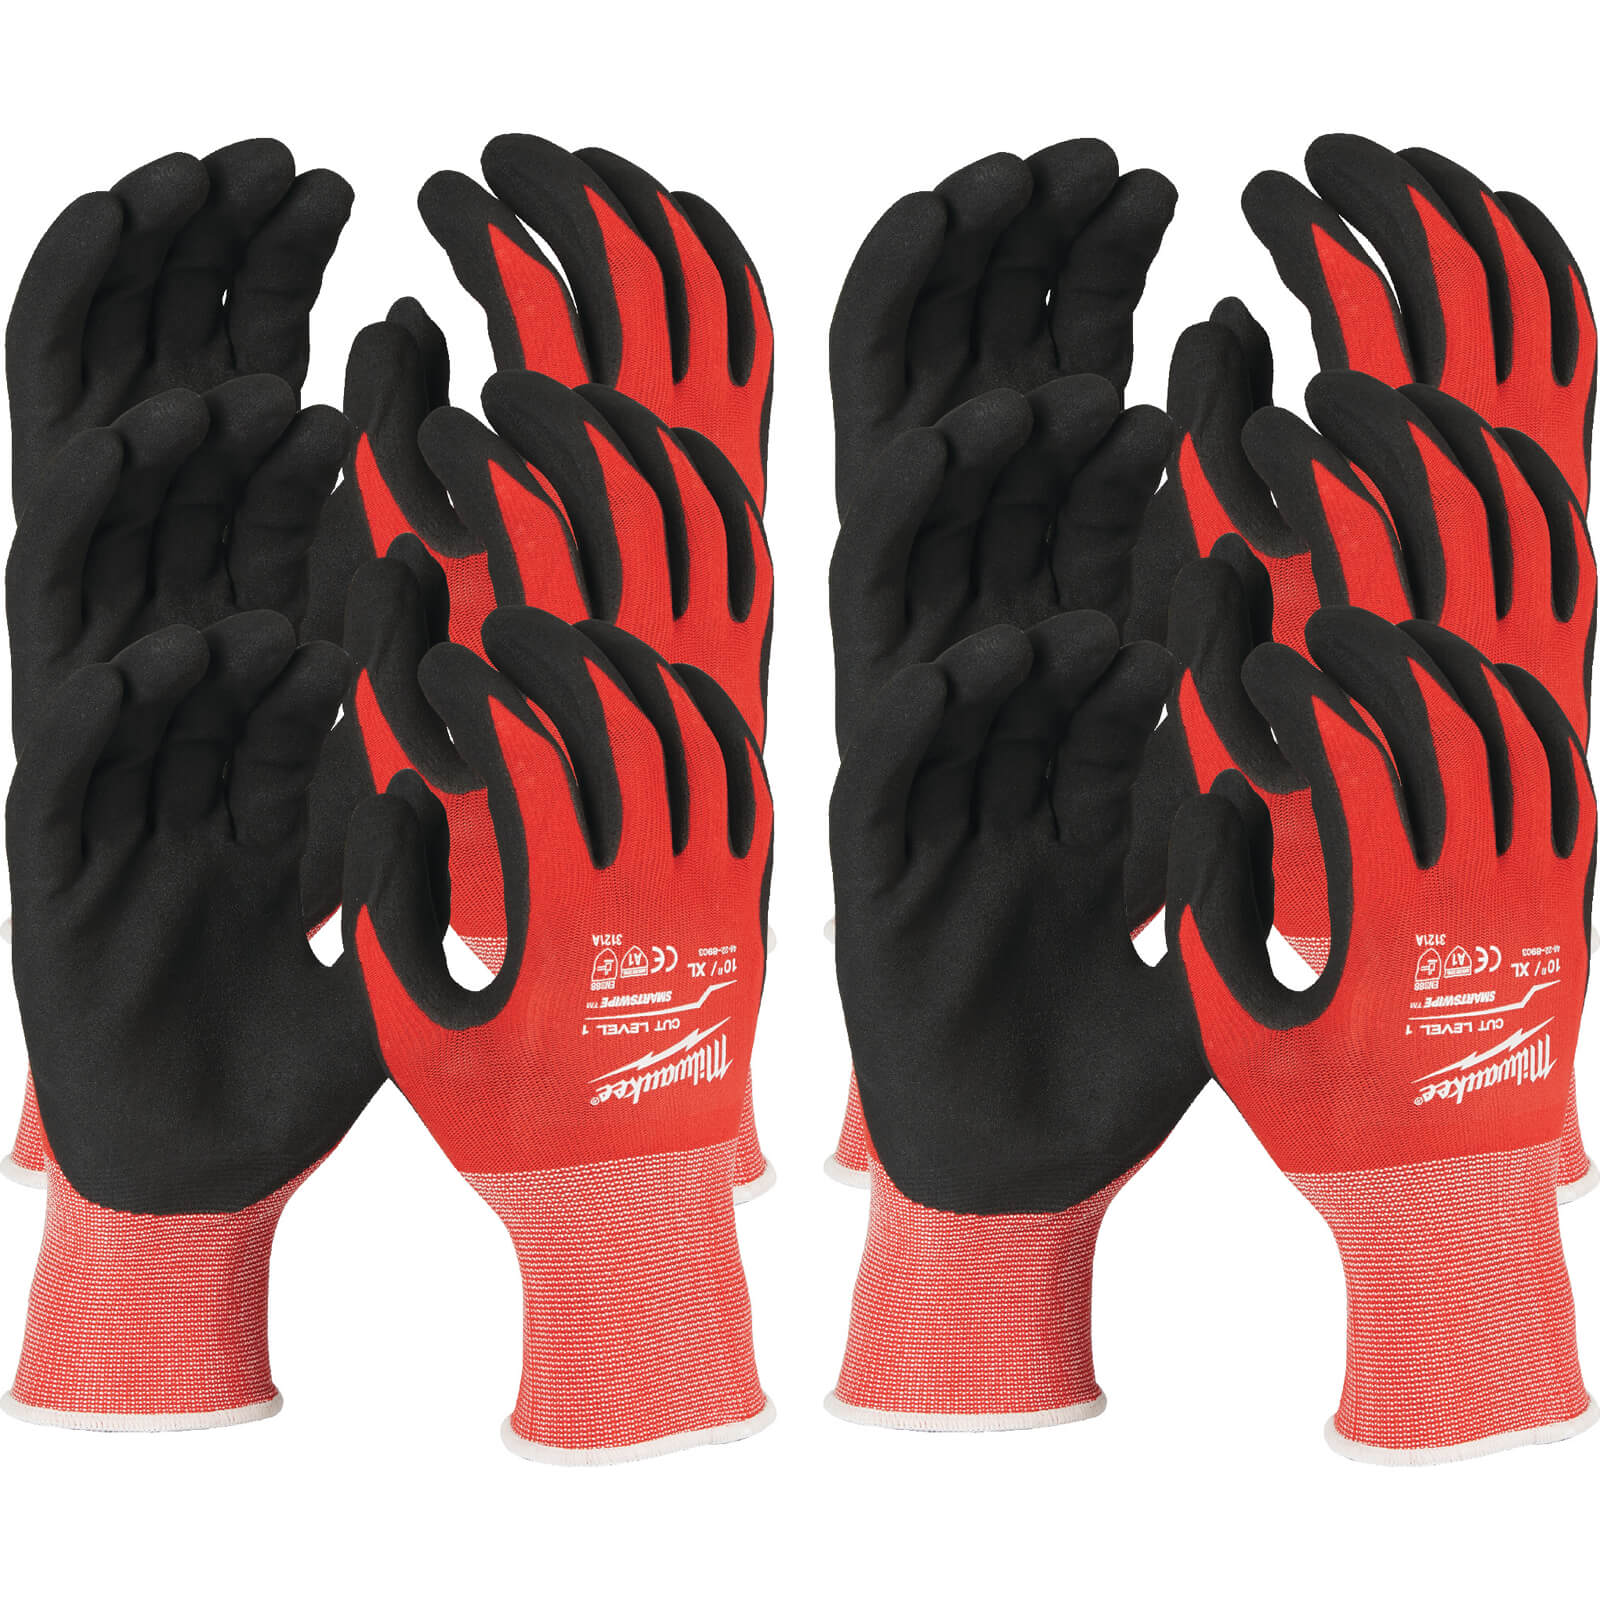 Image of Milwaukee Cut Level 1 Dipped Work Gloves Black / Red XL Pack of 12